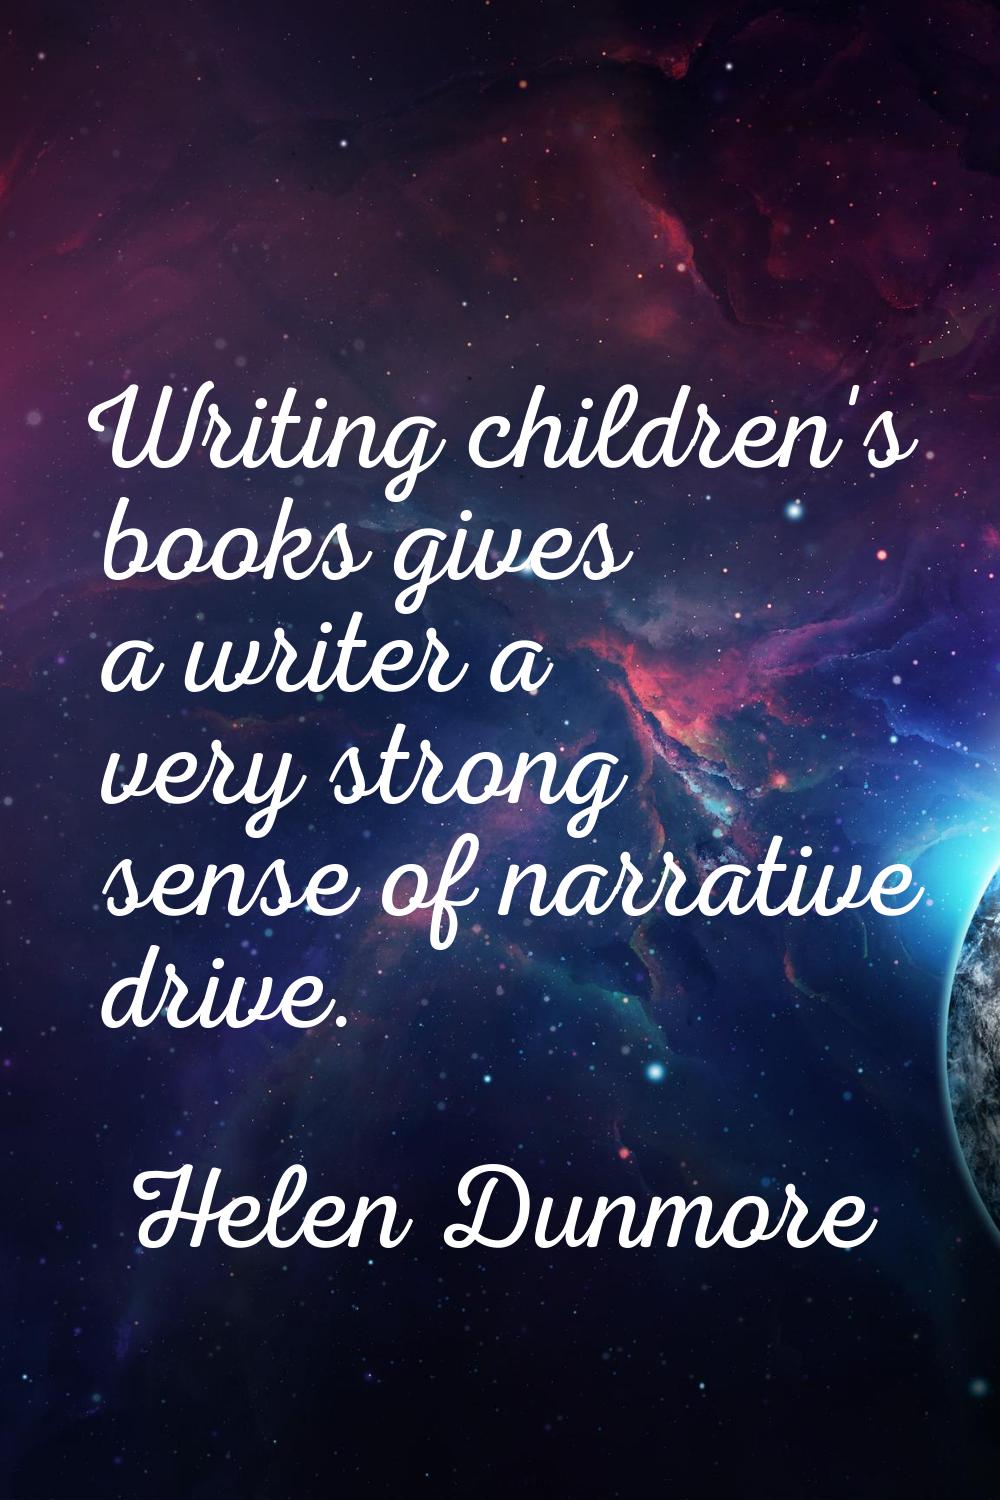 Writing children's books gives a writer a very strong sense of narrative drive.